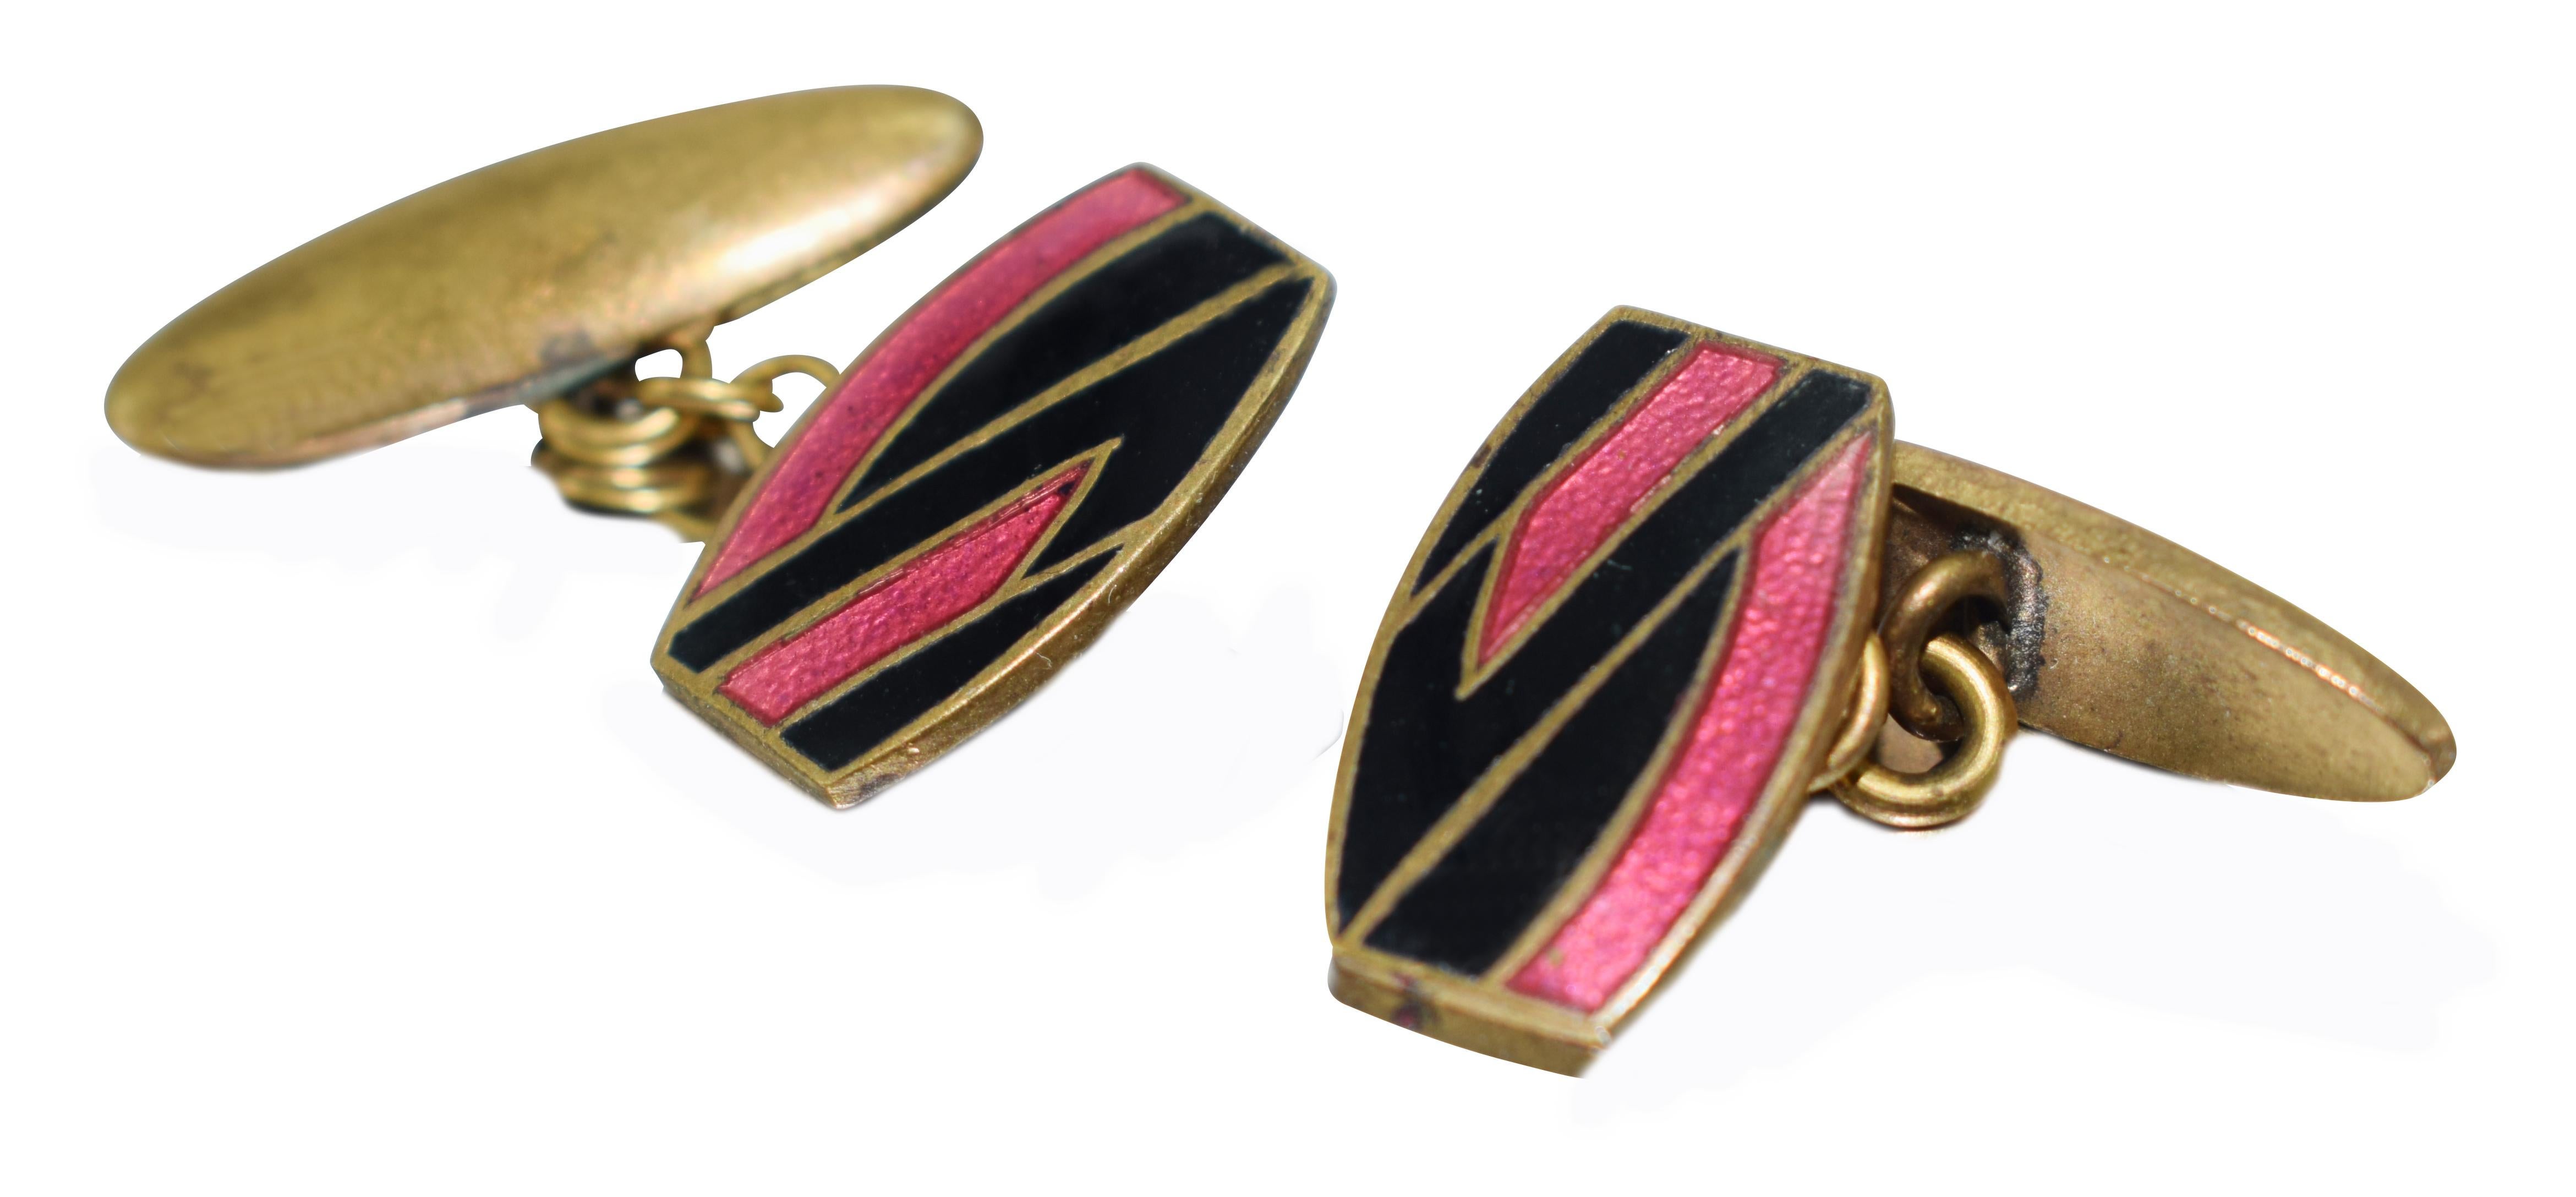 For the gentlemen out there who lean towards something a little different, less generic and oozing style consider these original matching pair of Art Deco gents cufflinks with a great geometric pattern. Gold toned metal with pink and black enamel